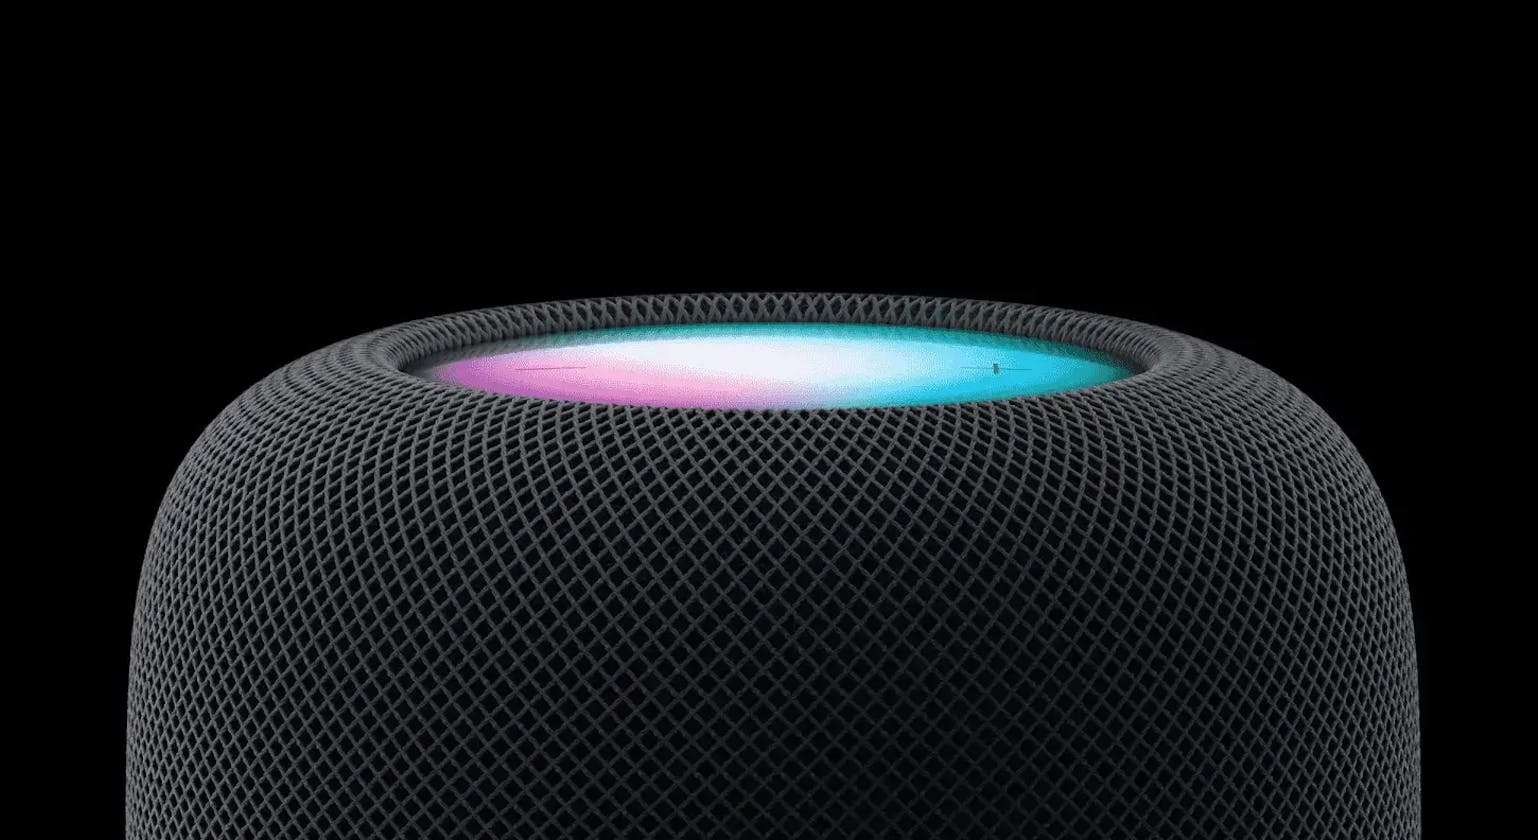 Apple Releases a New Full-Size HomePod